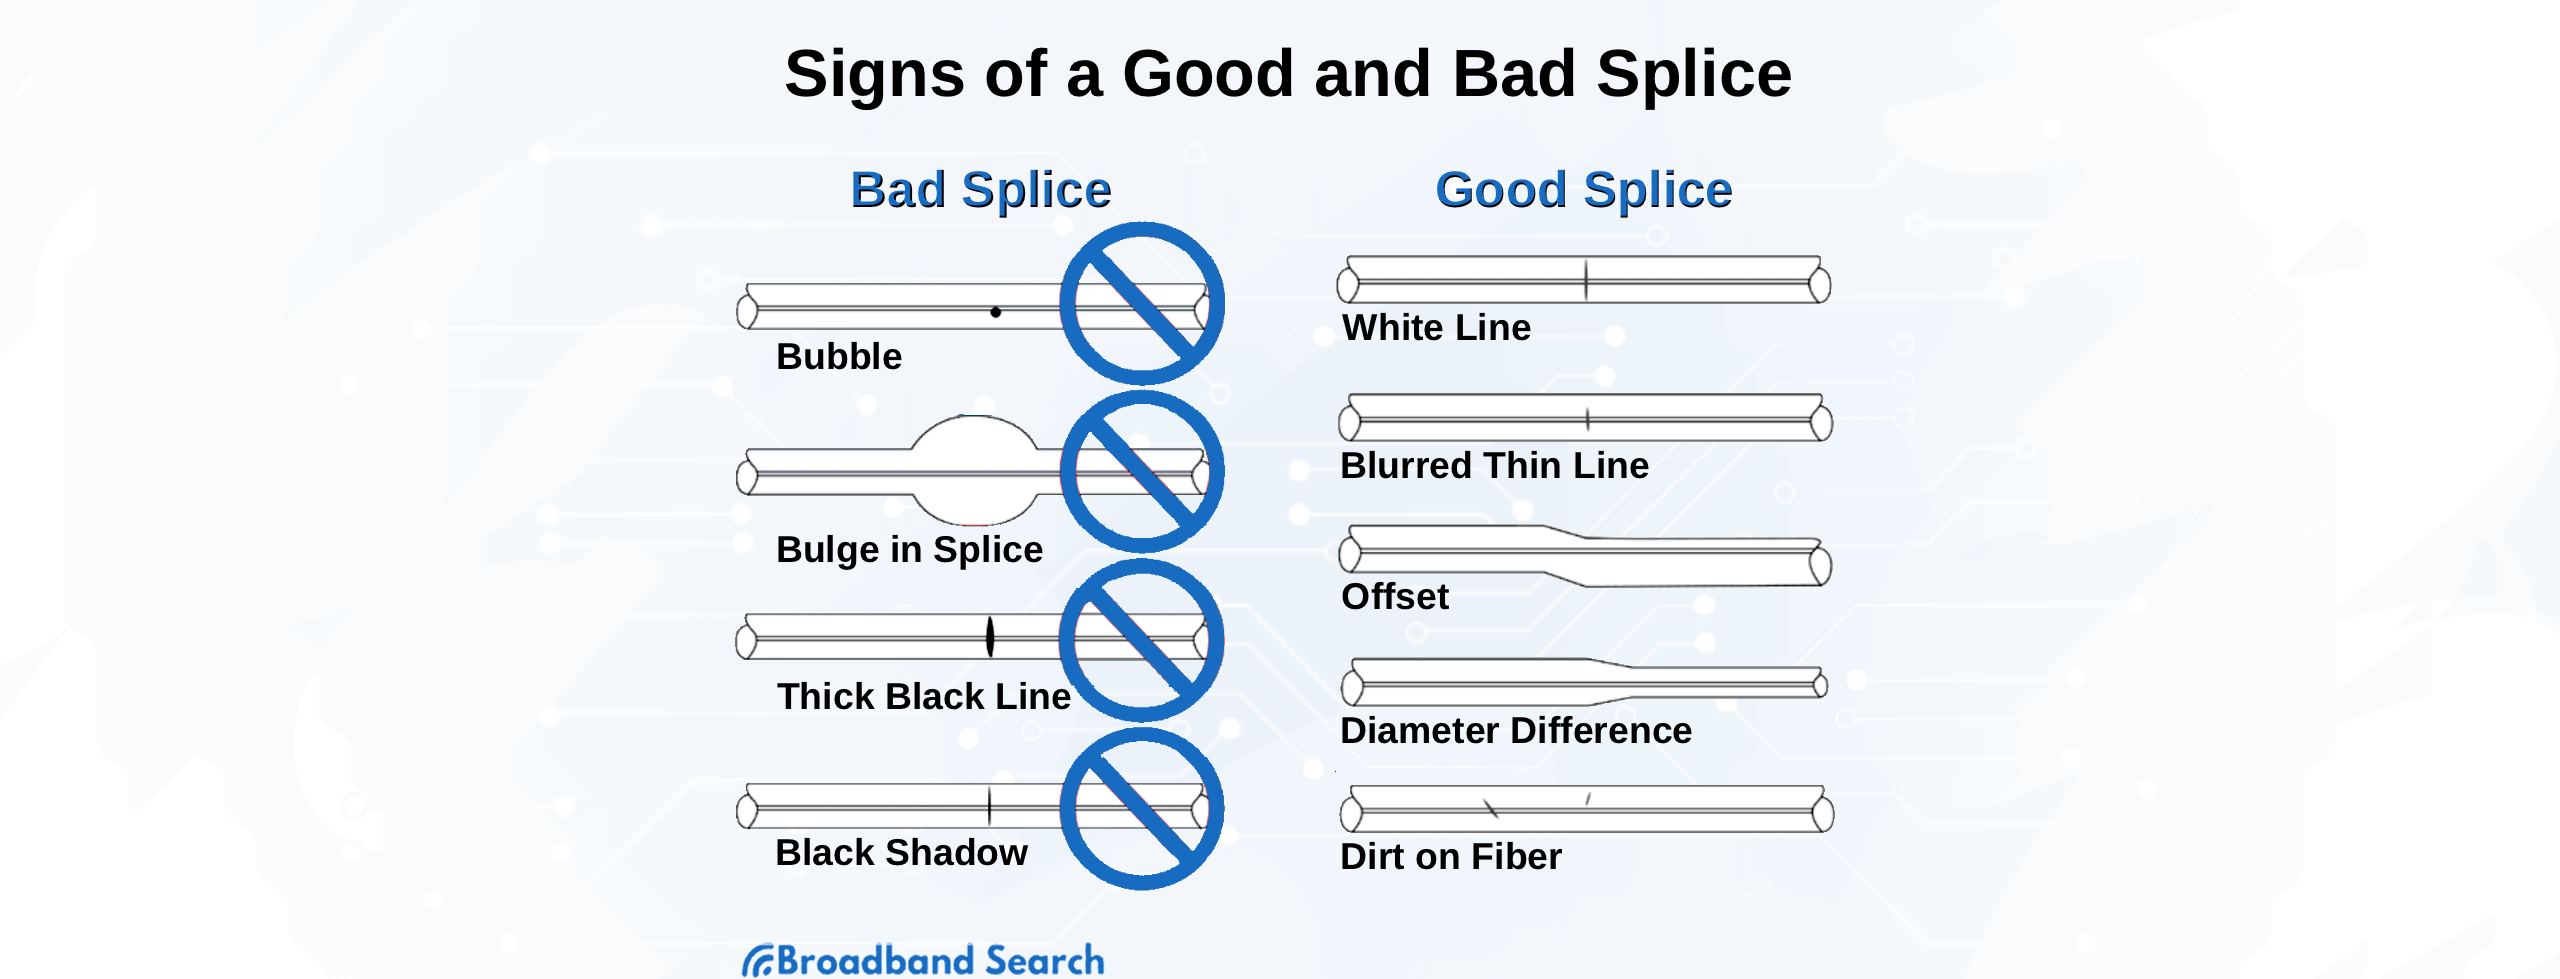 Signs of a good and bad splice